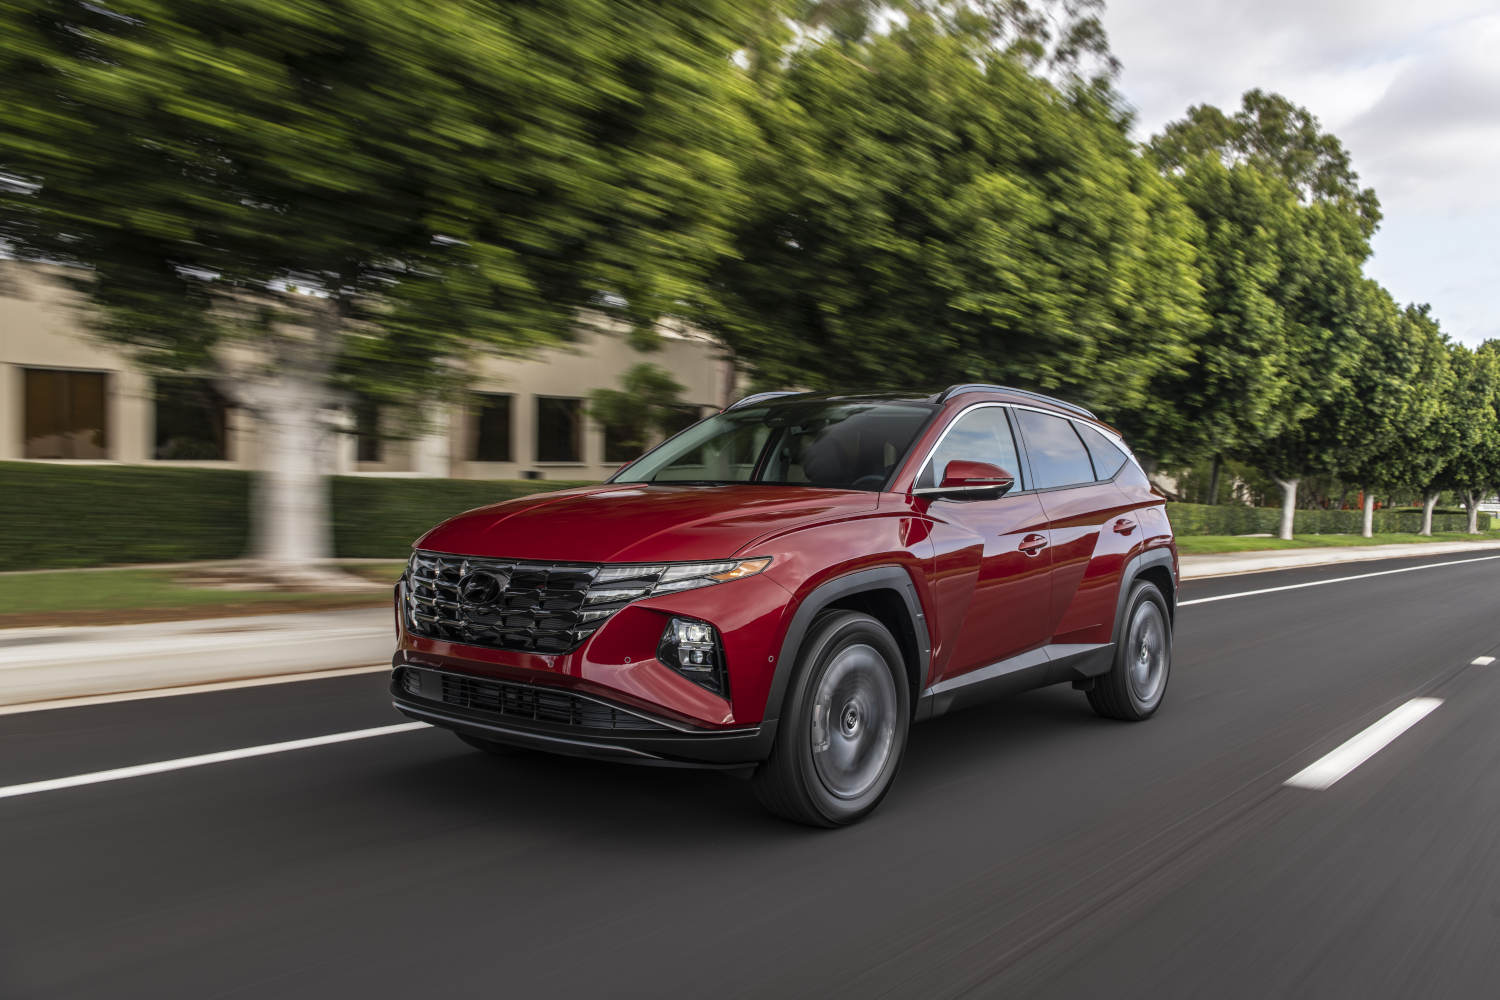 The best small family SUV is this 2023 Hyundai Tucson